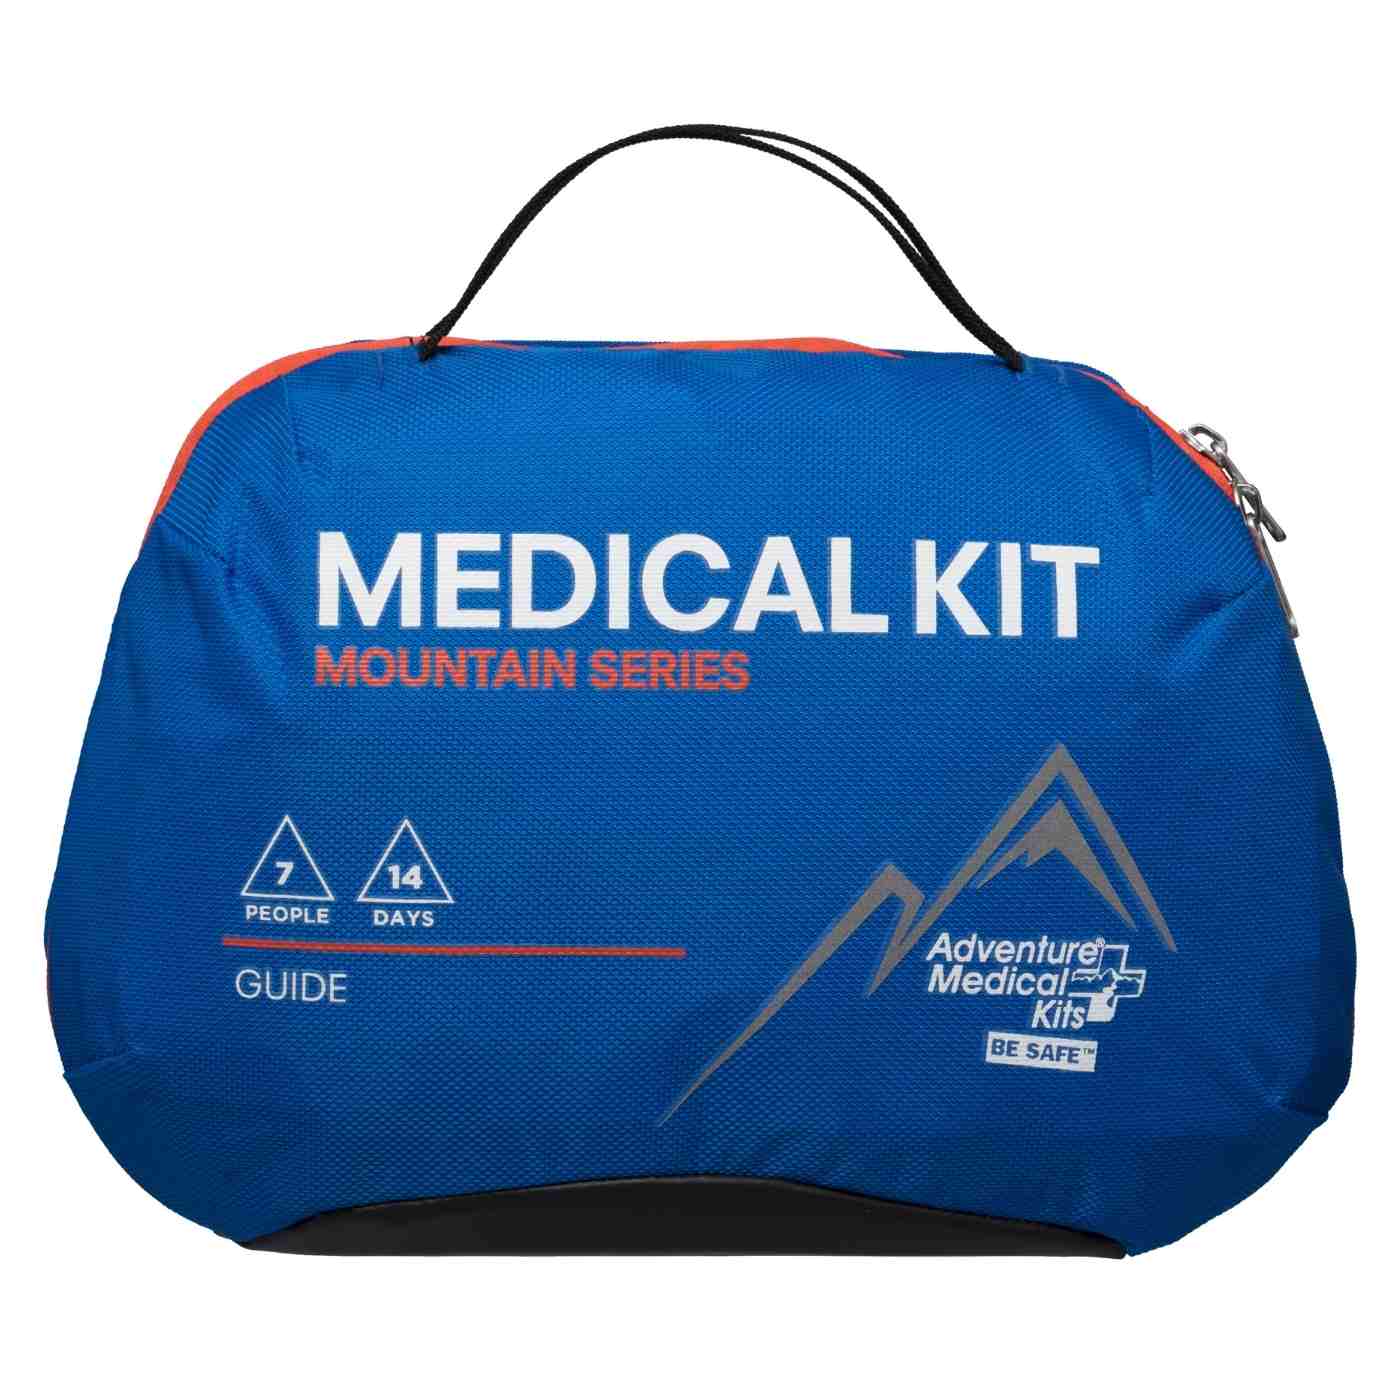 Mountain Series Medical Kit - Guide front